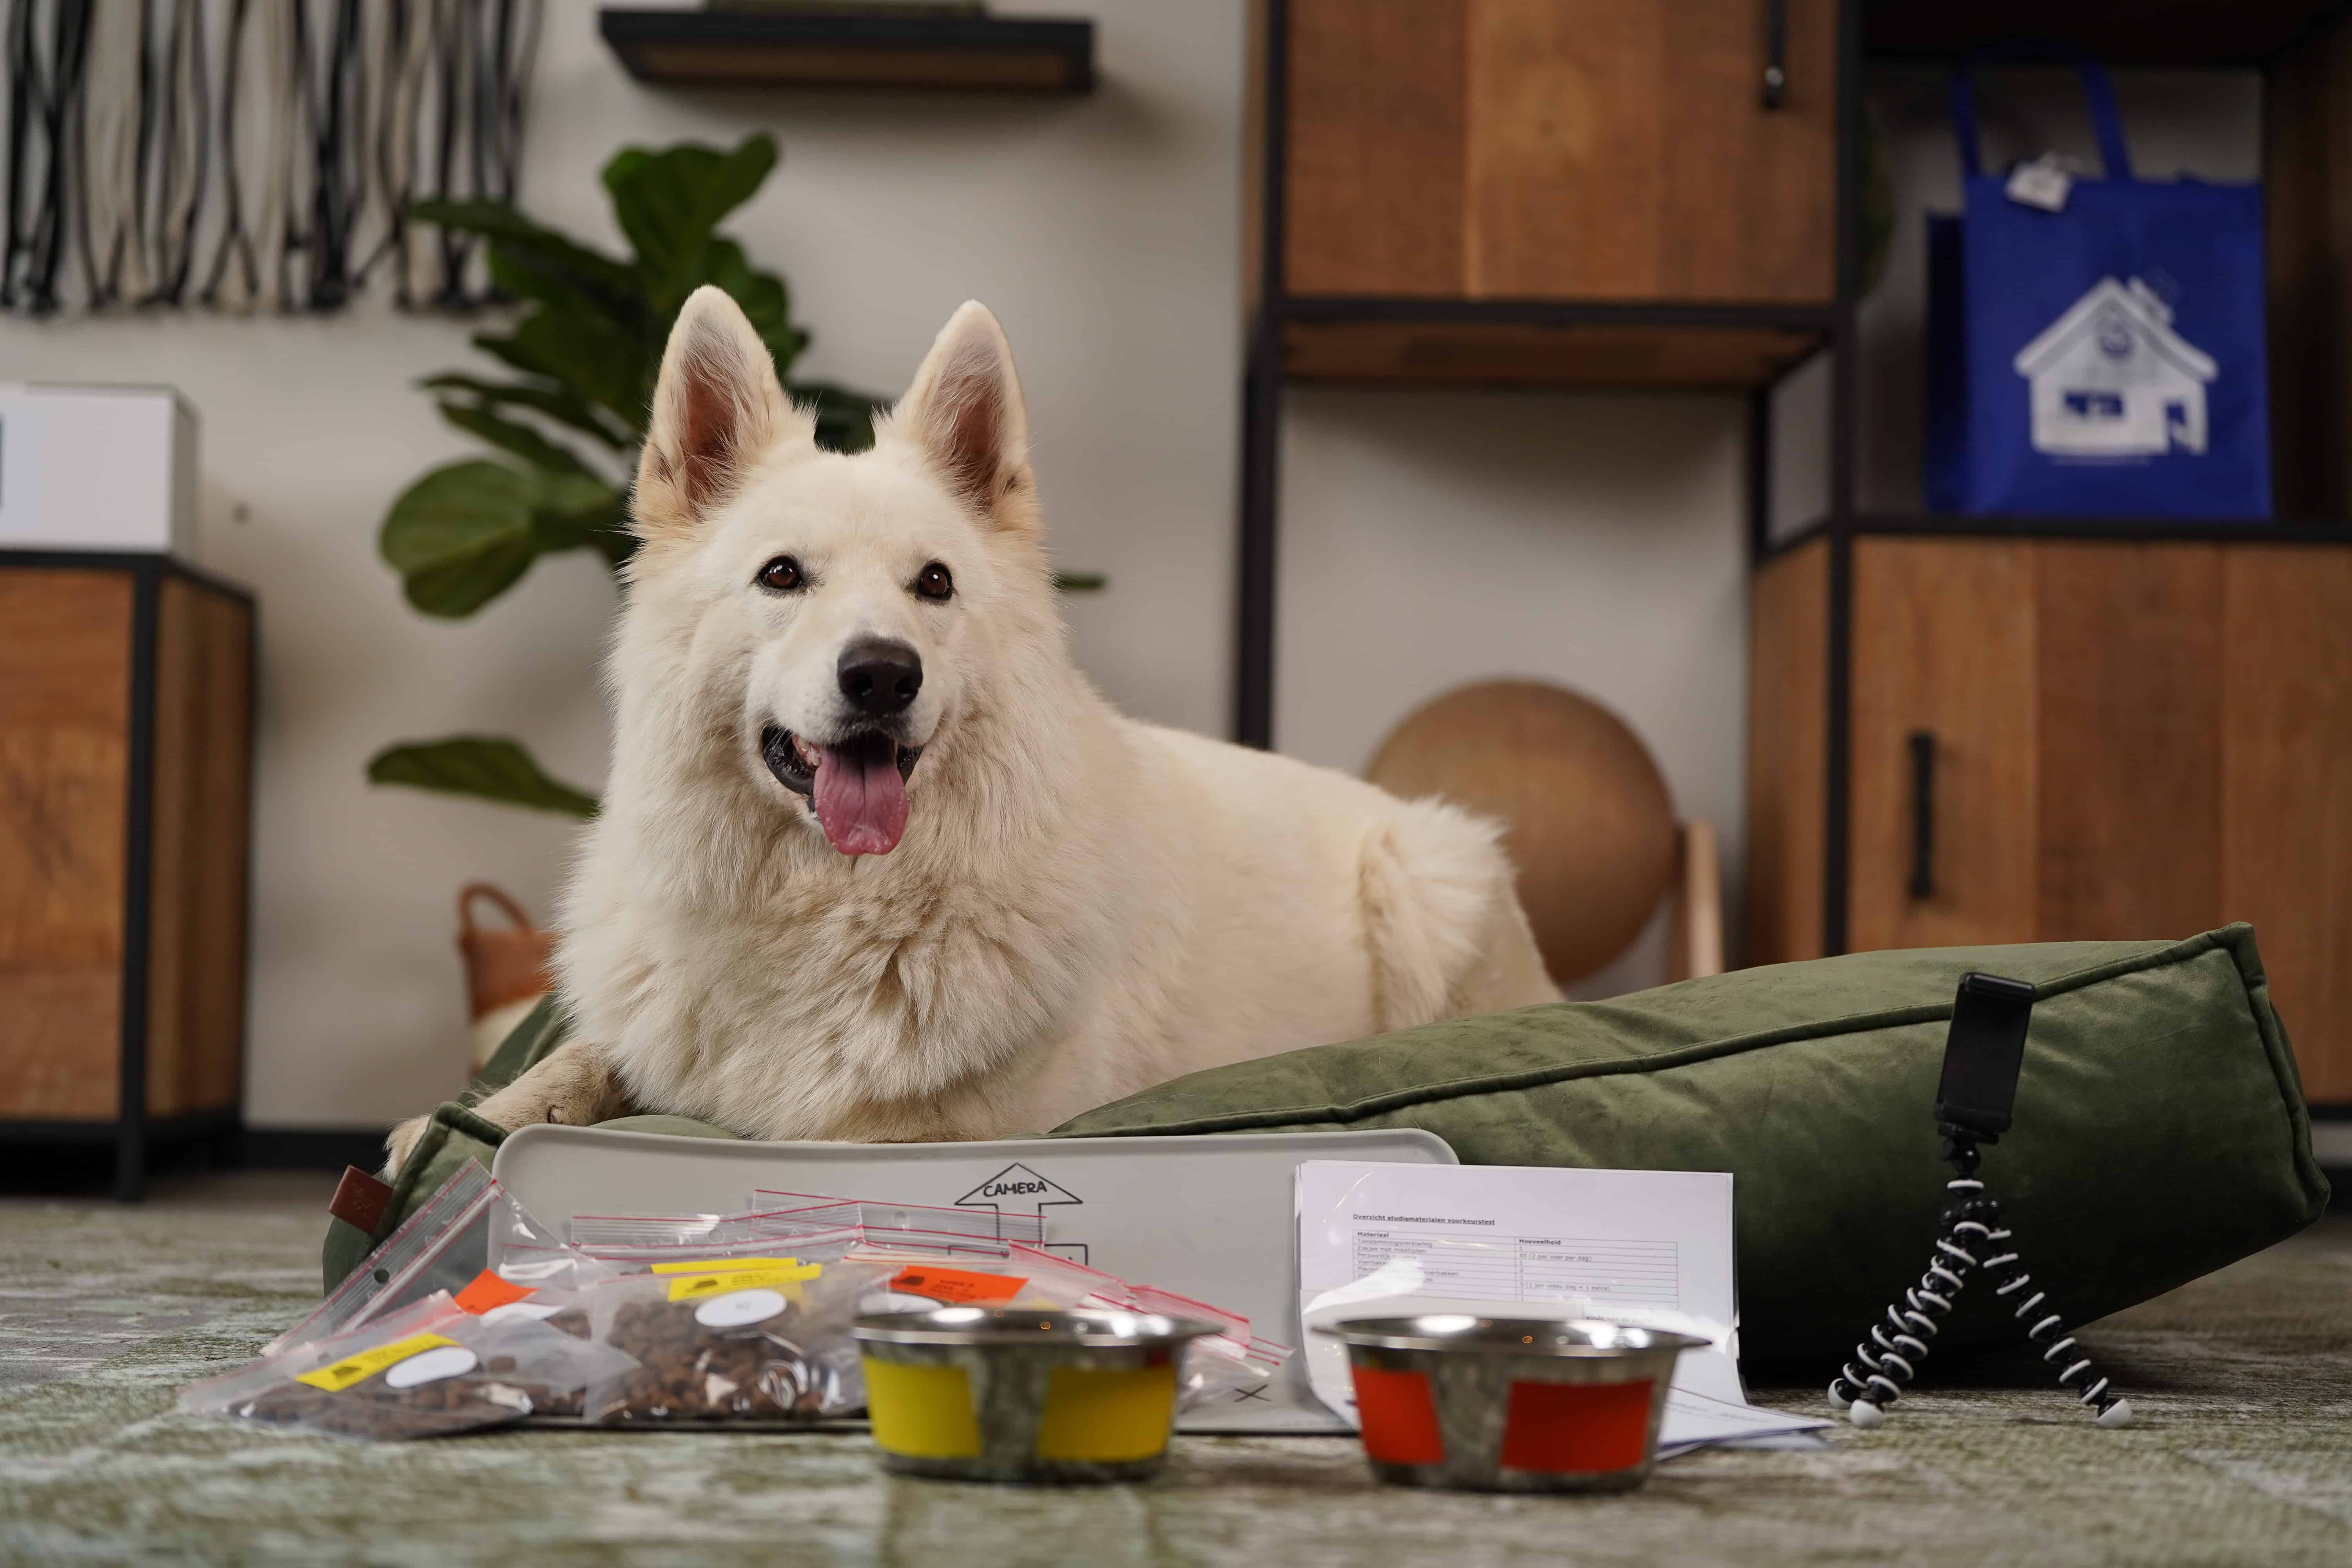 Our pets' nutrition can be greatly improved thanks to in-home testing